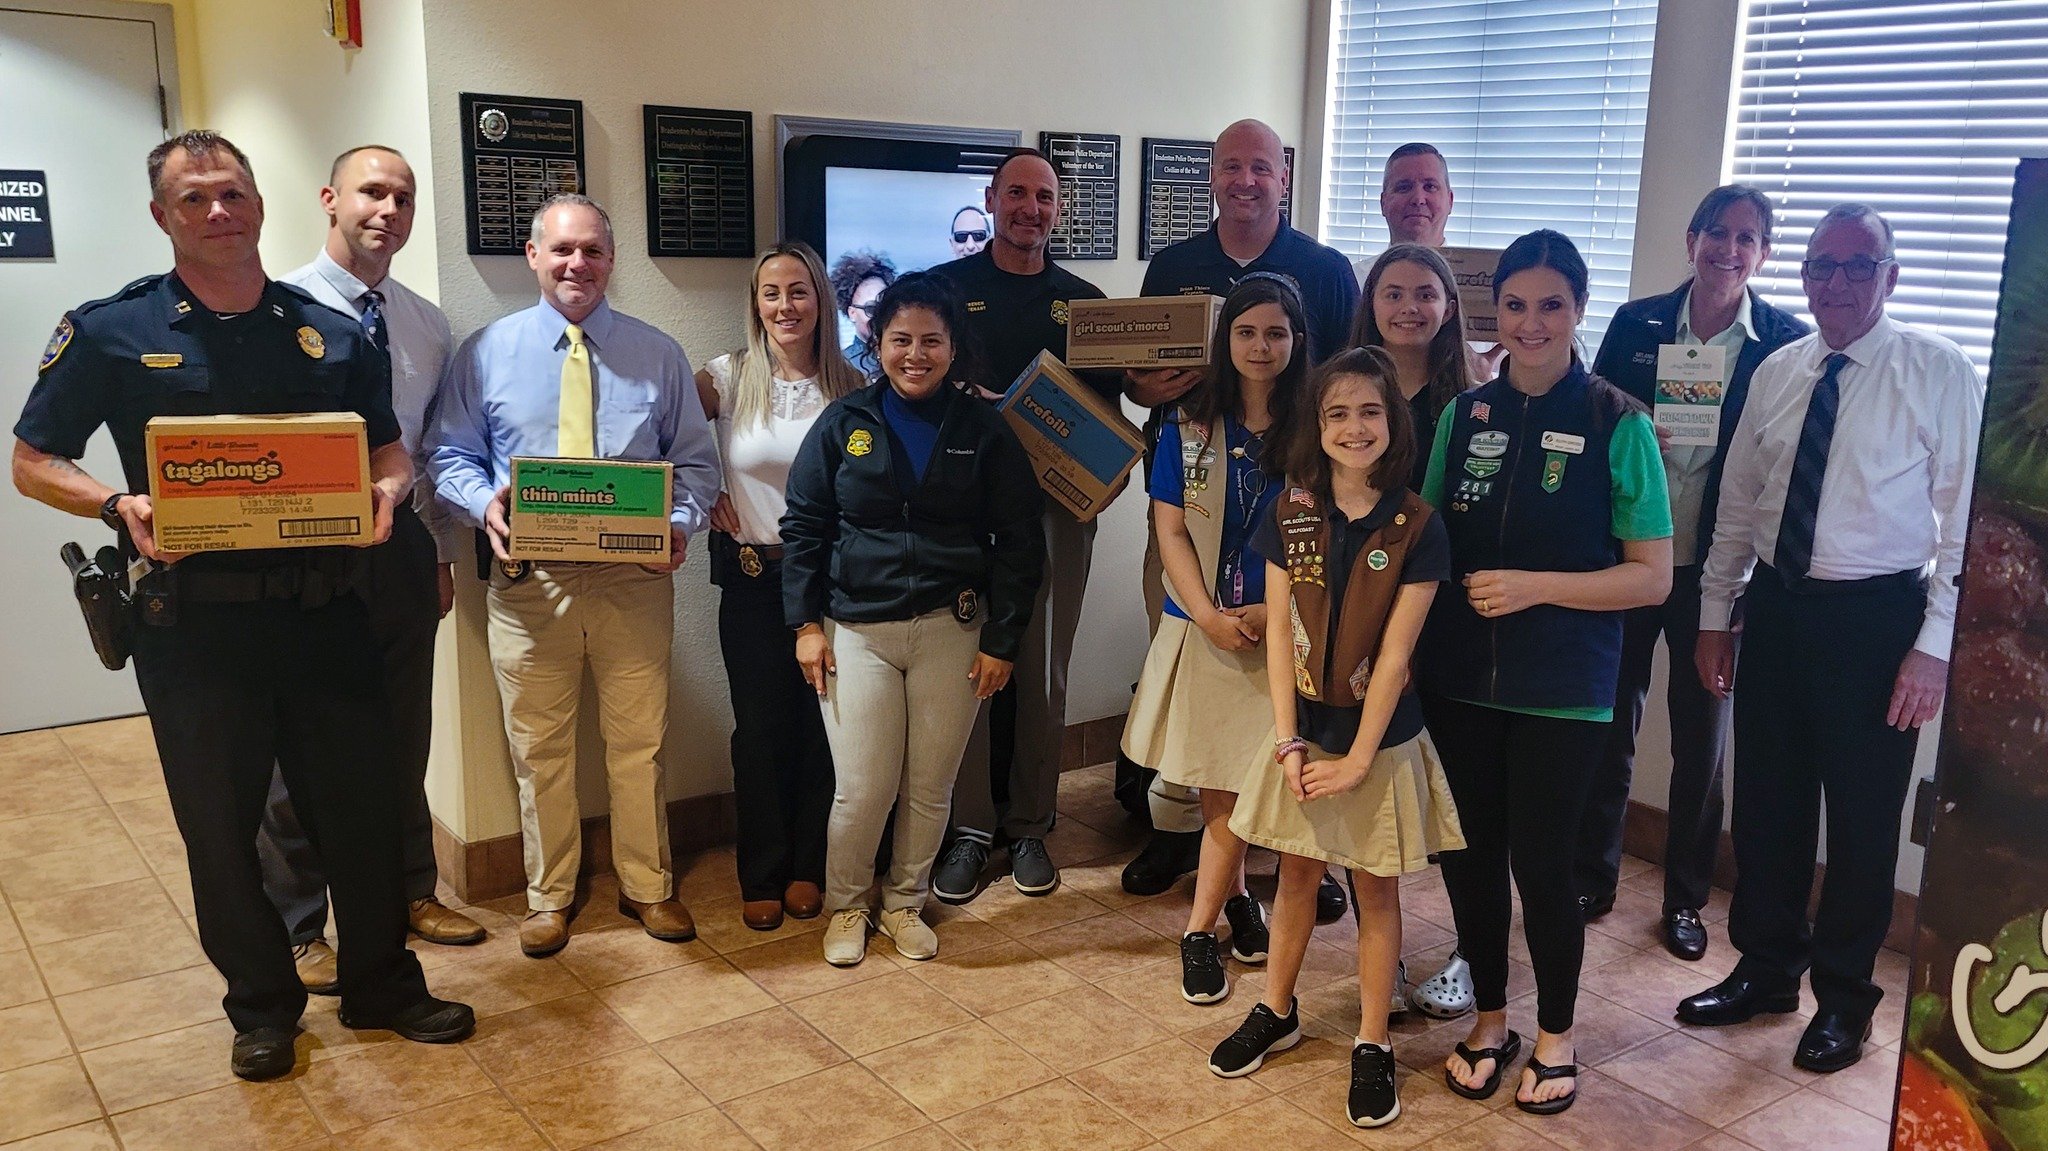 🍪 THANK YOU, Girl Scout Troop 281, for stopping by with some of our favorite cookies! According to our unscientific poll of available officers, Tagalongs are a popular choice. But you can never go wrong with Thin Mints!